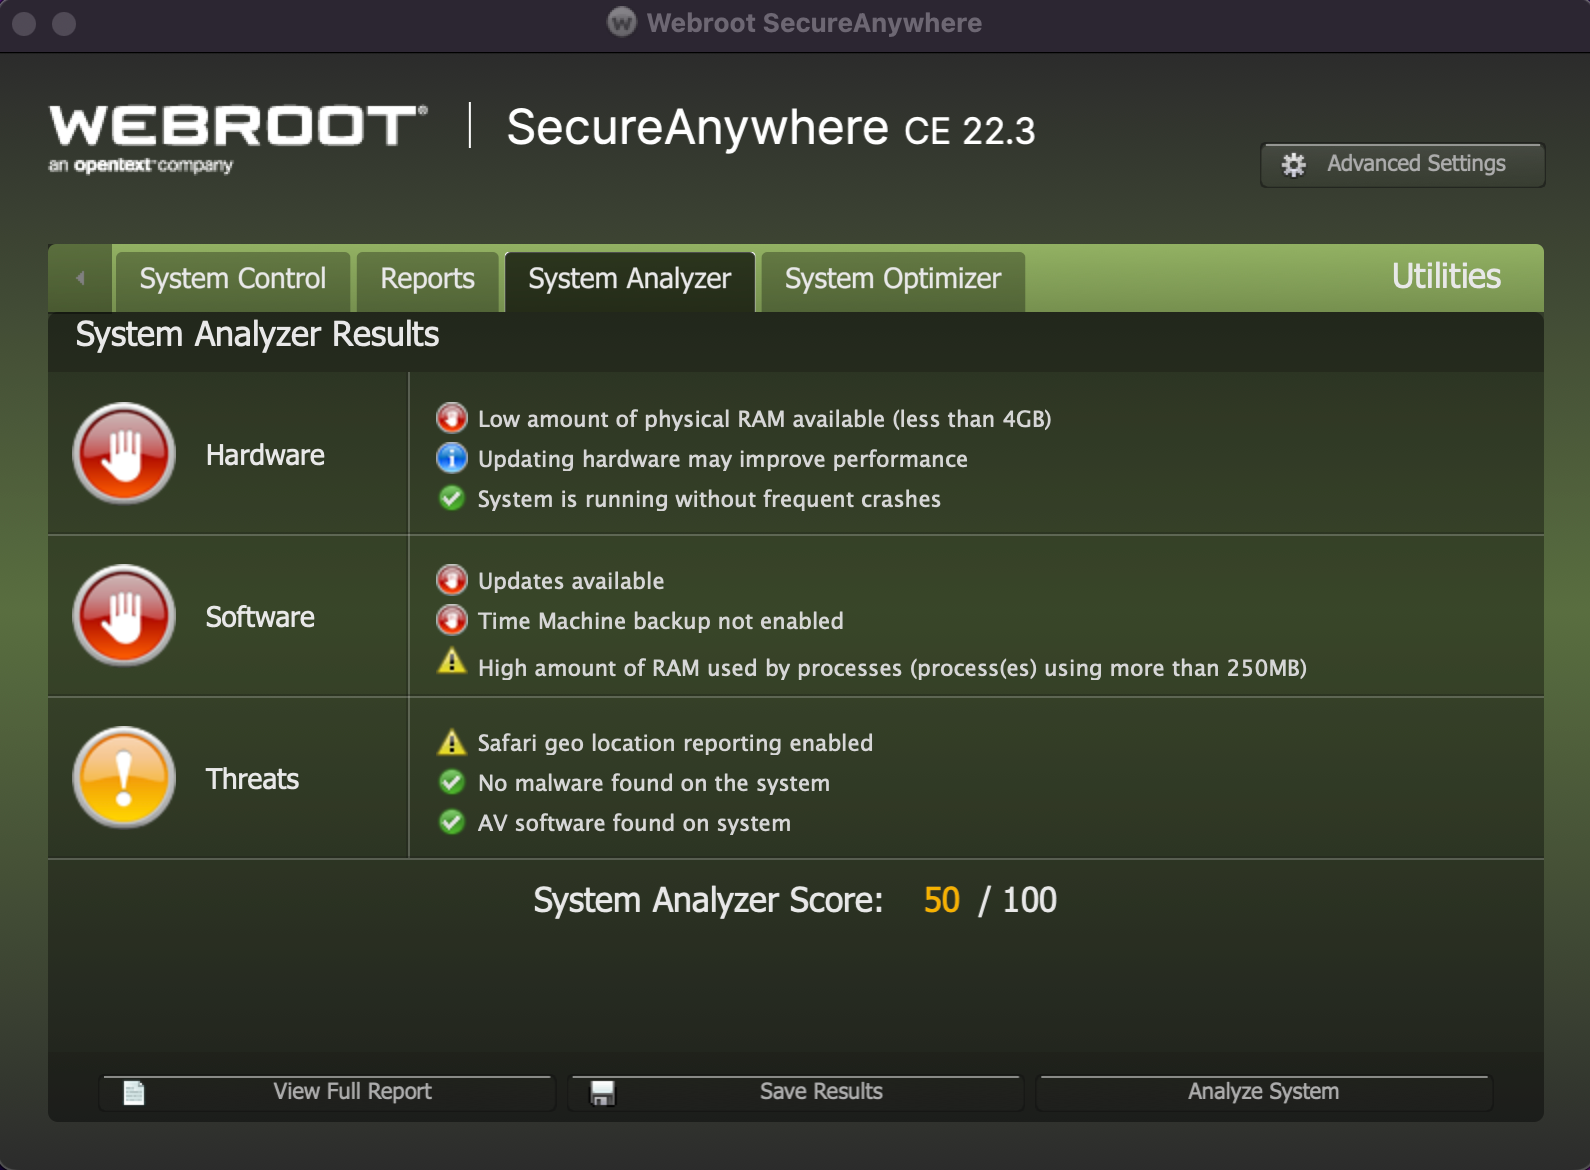 A screenshot of the Webroot System Analyzer results page. The results show issues for hardware and software, plus an alert that Safari's geolocation reporting is enabled. The total system score is 50 out of 100.